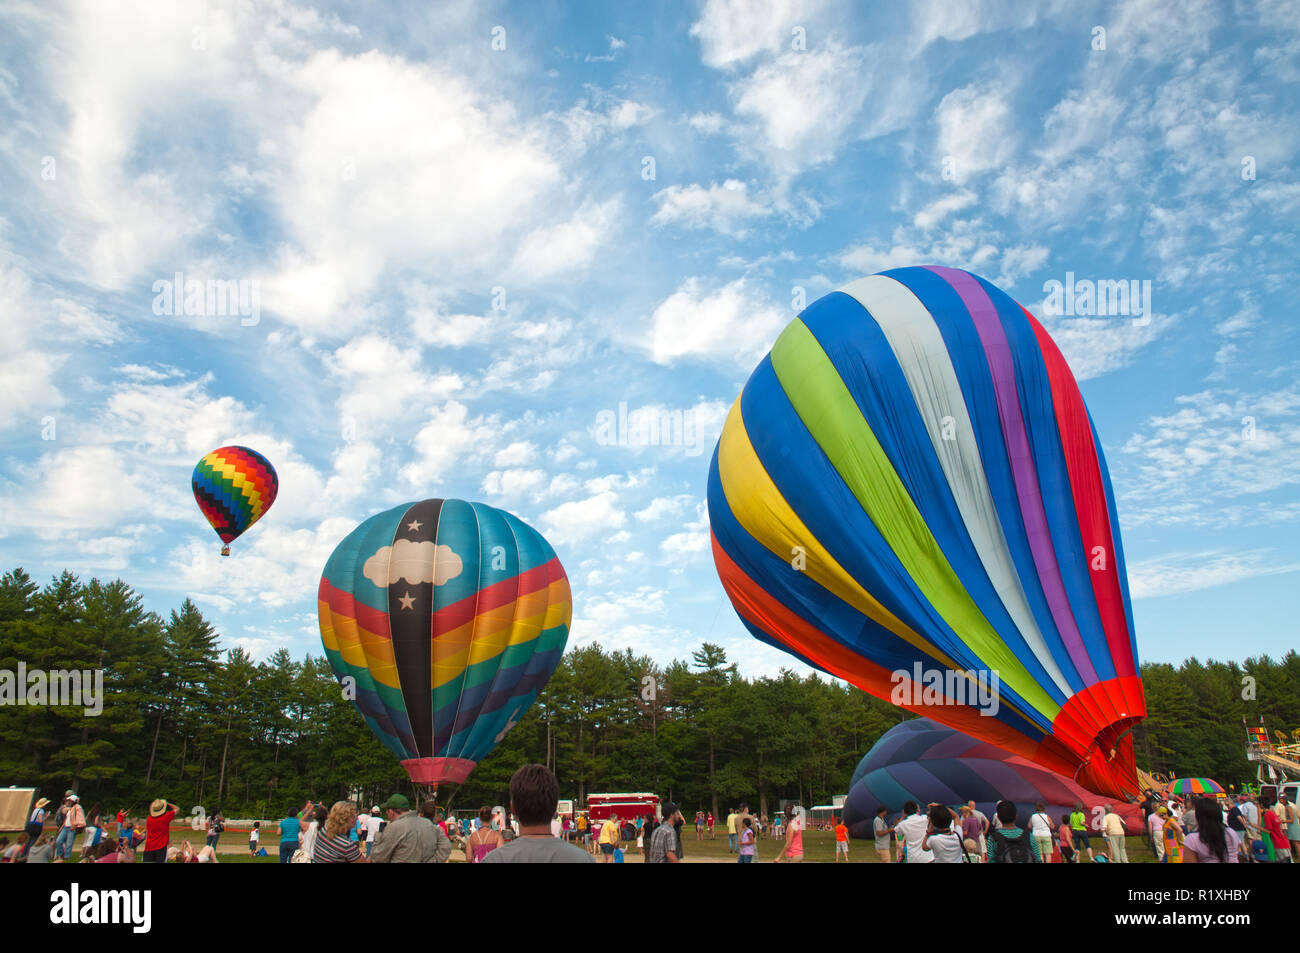 Many various colors and designs were the attraction of these hot air balloons. Stock Photo